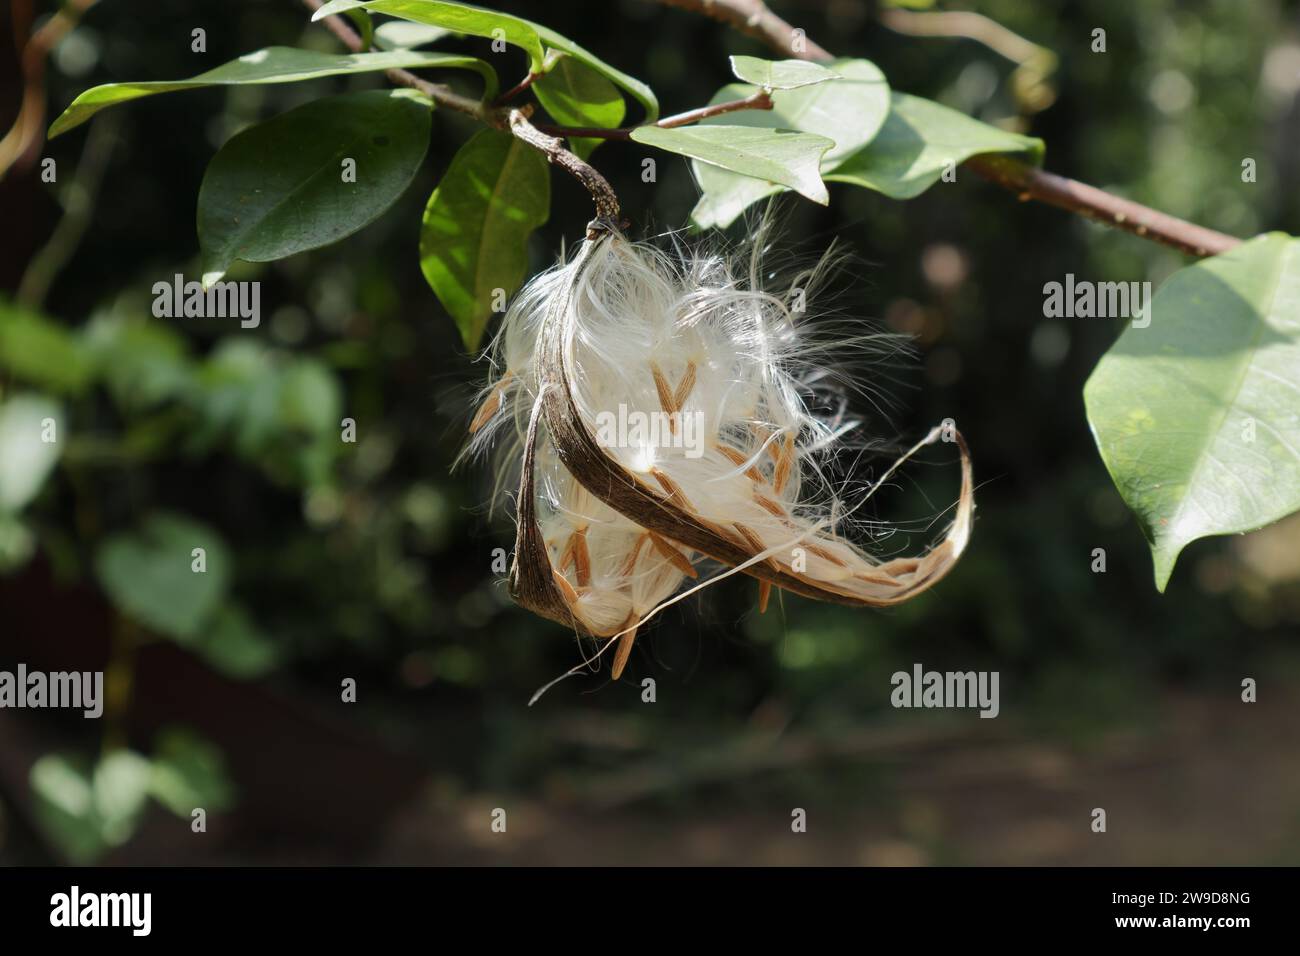 An opened coral swirl seed capsule (Wrightia antidysenterica) hanging on a twig with the lightweight, furry seeds that are ready to disperse by the wi Stock Photo